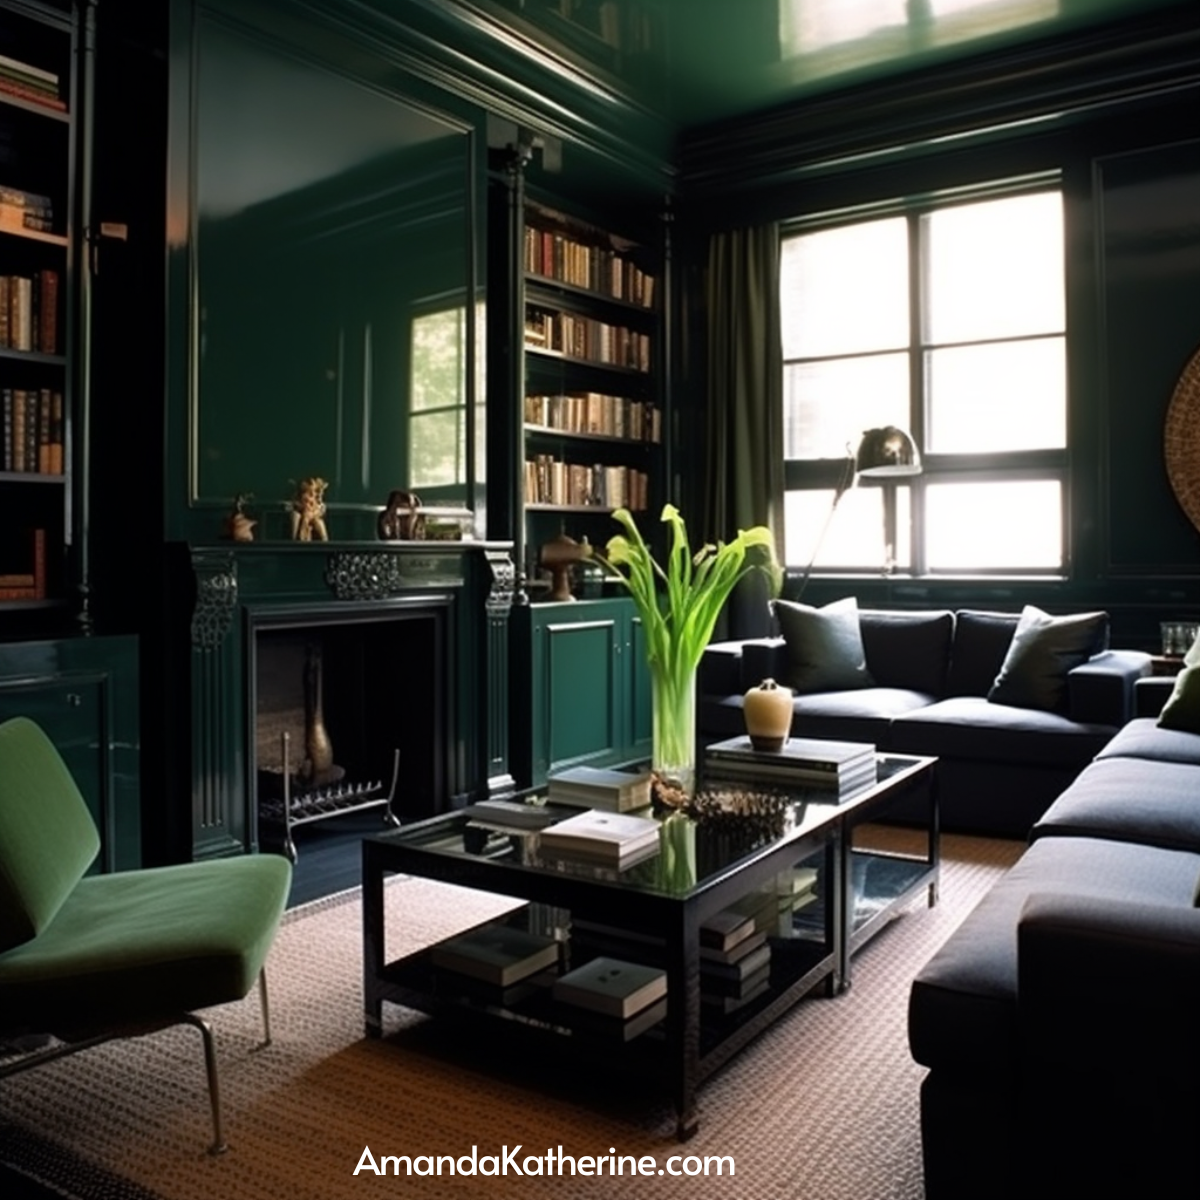 31 Stunning Fireplace Wall Ideas with a TV for Your Living Room | green and black fireplace